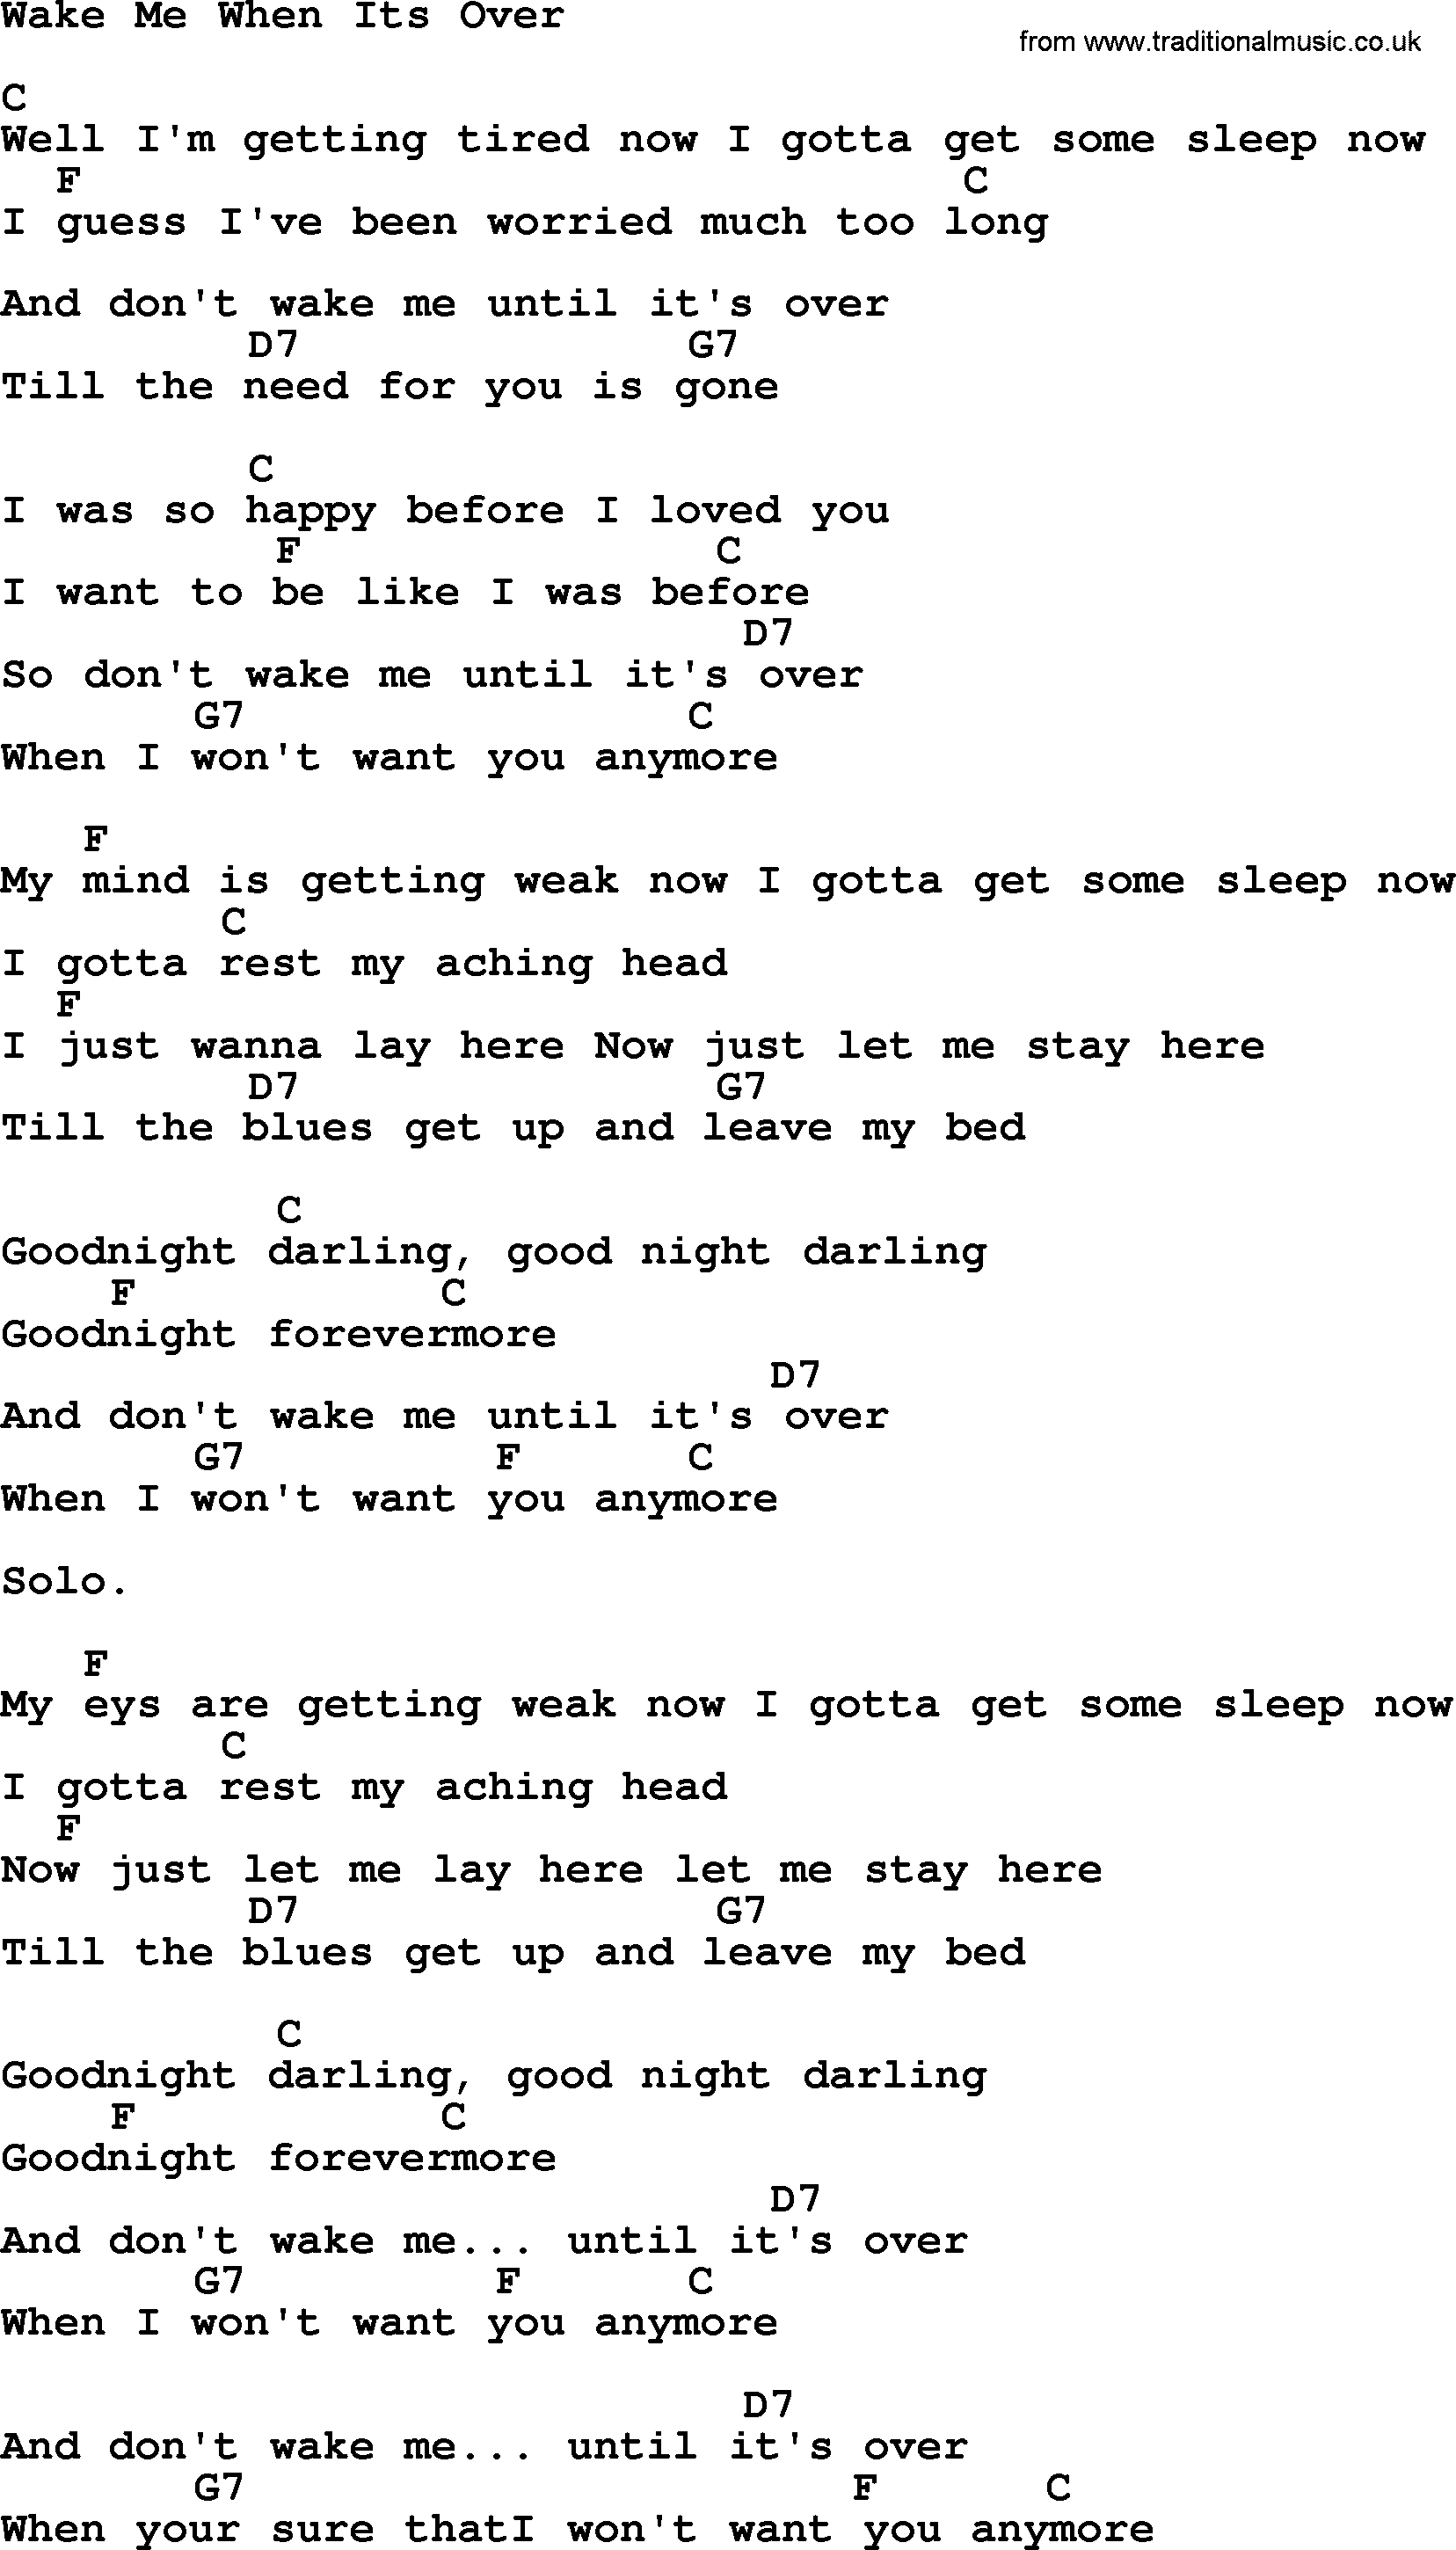 Willie Nelson song: Wake Me When Its Over, lyrics and chords